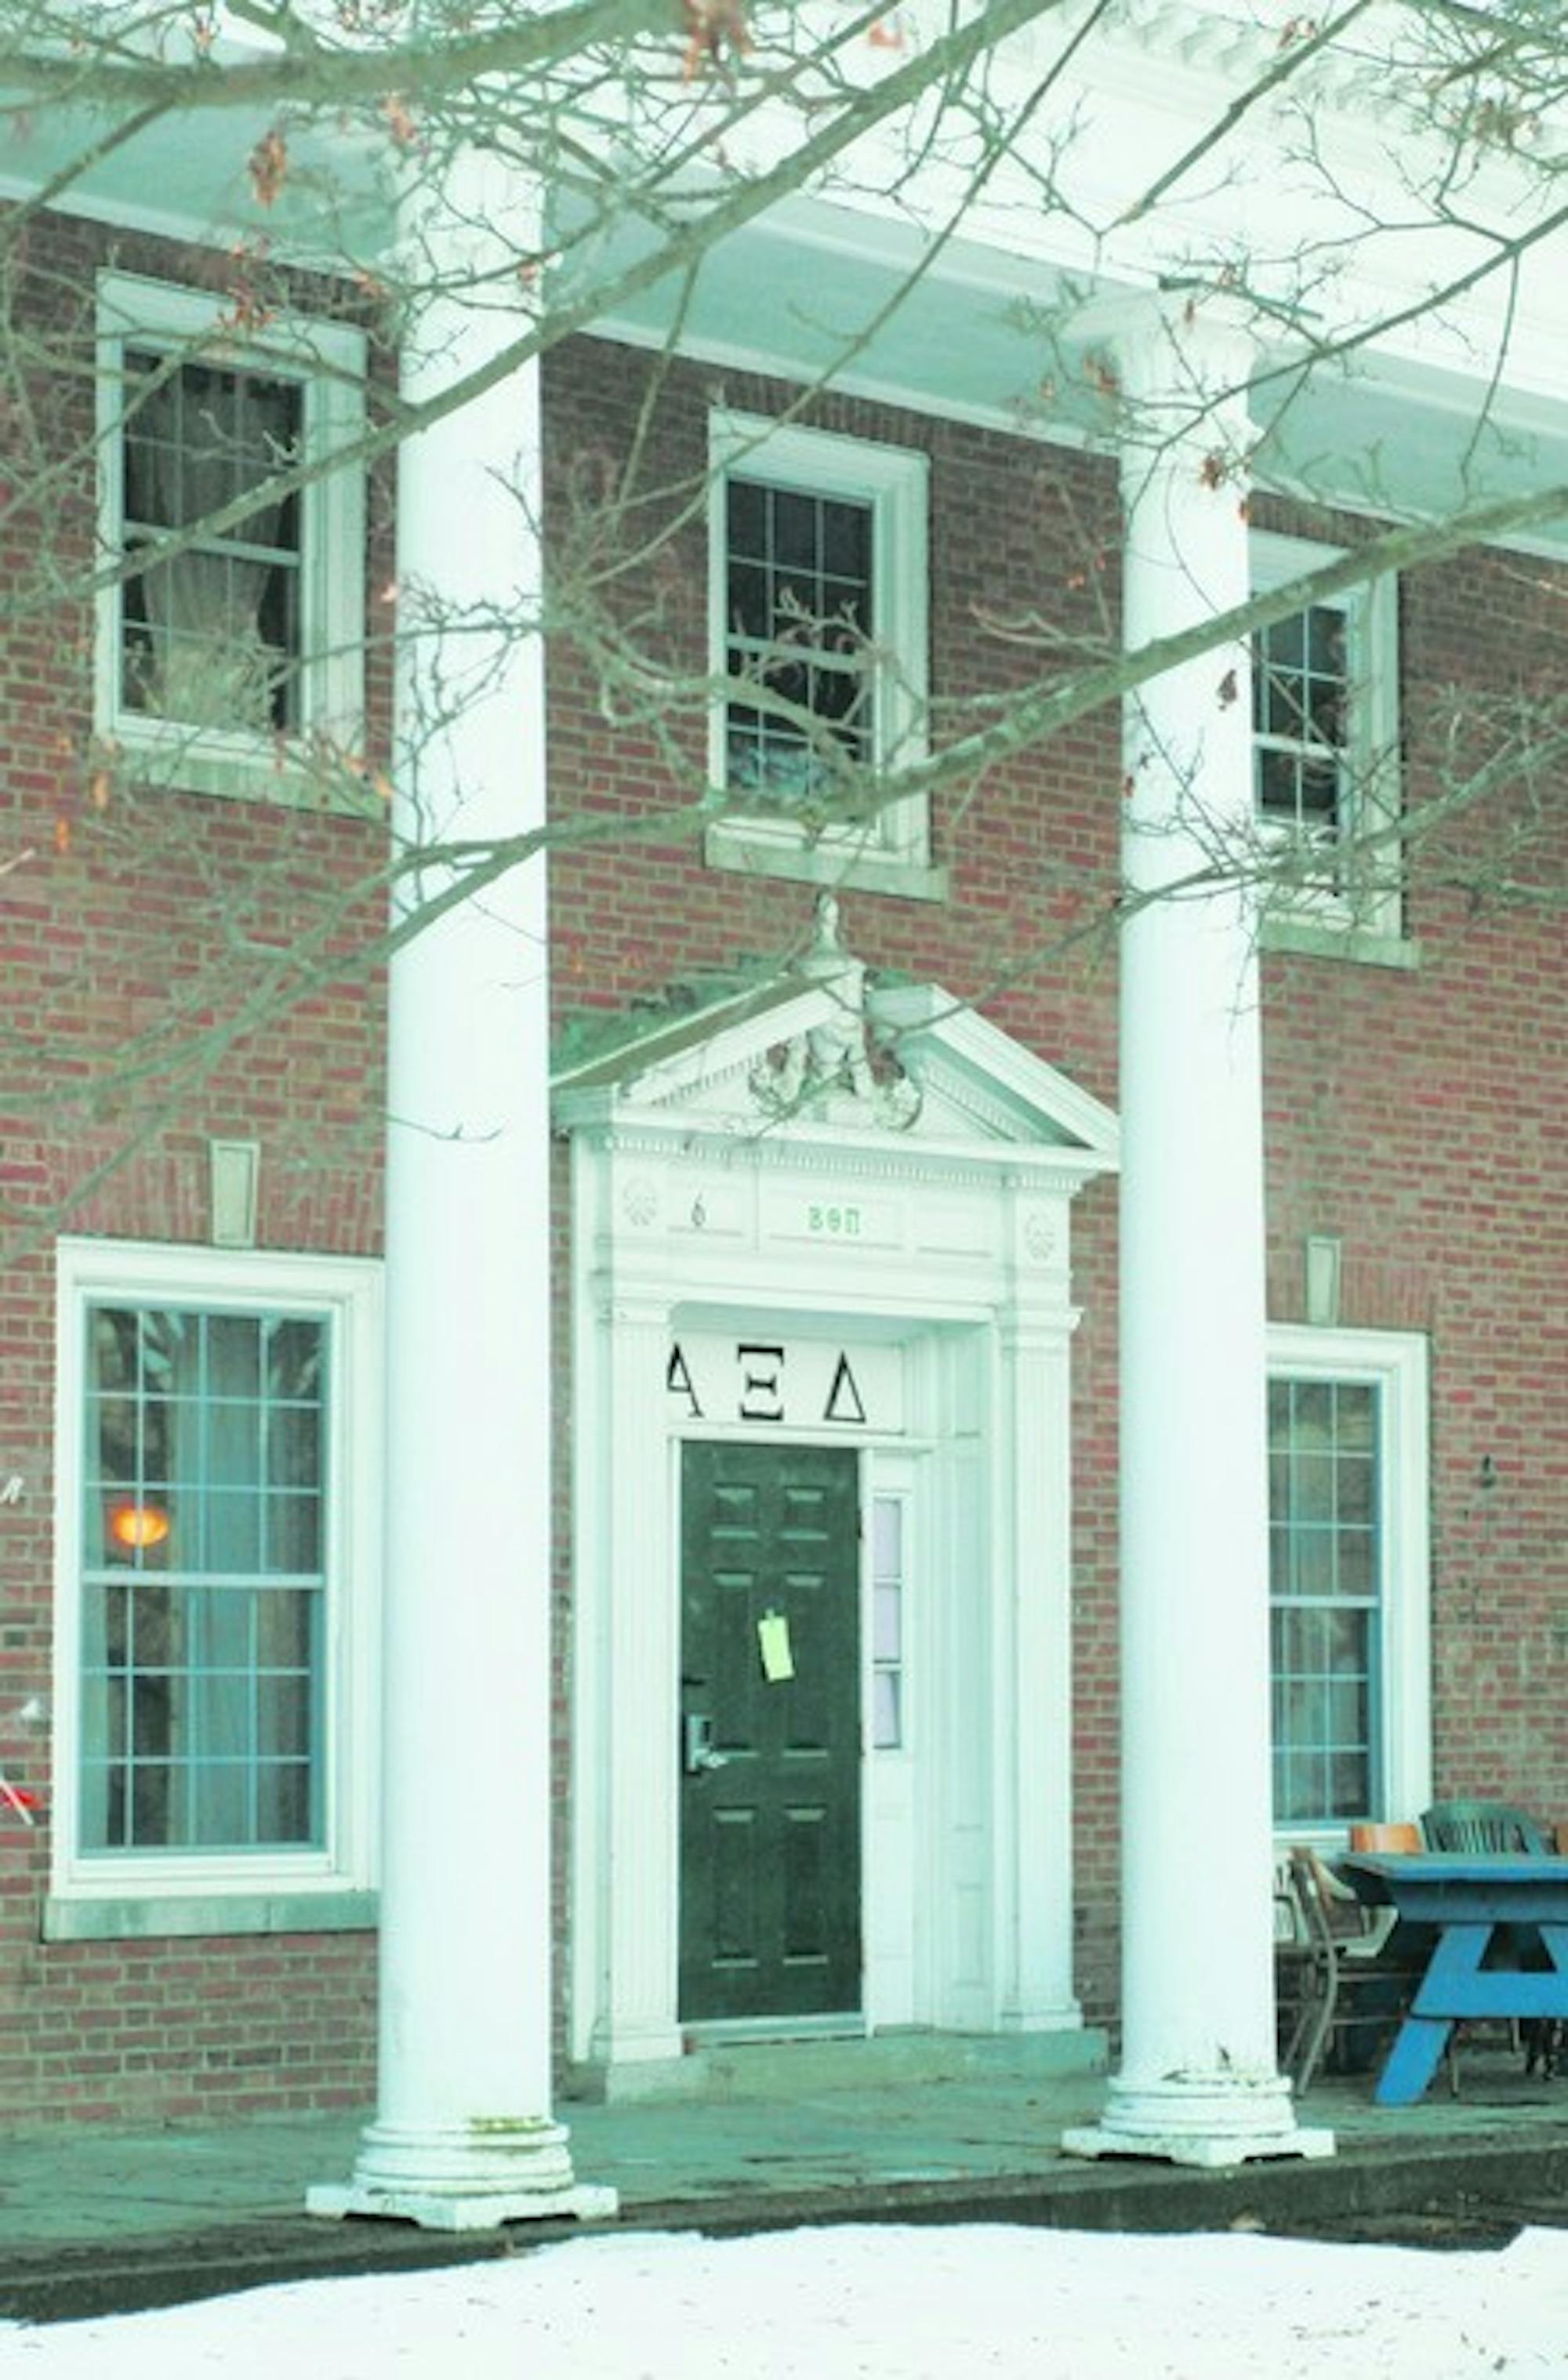 Beta Theta Pi fraternity will repossess its physical plant at 6 Webster Ave. this fall, after leasing the house to Alpha Xi Delta sorority for 10 years.